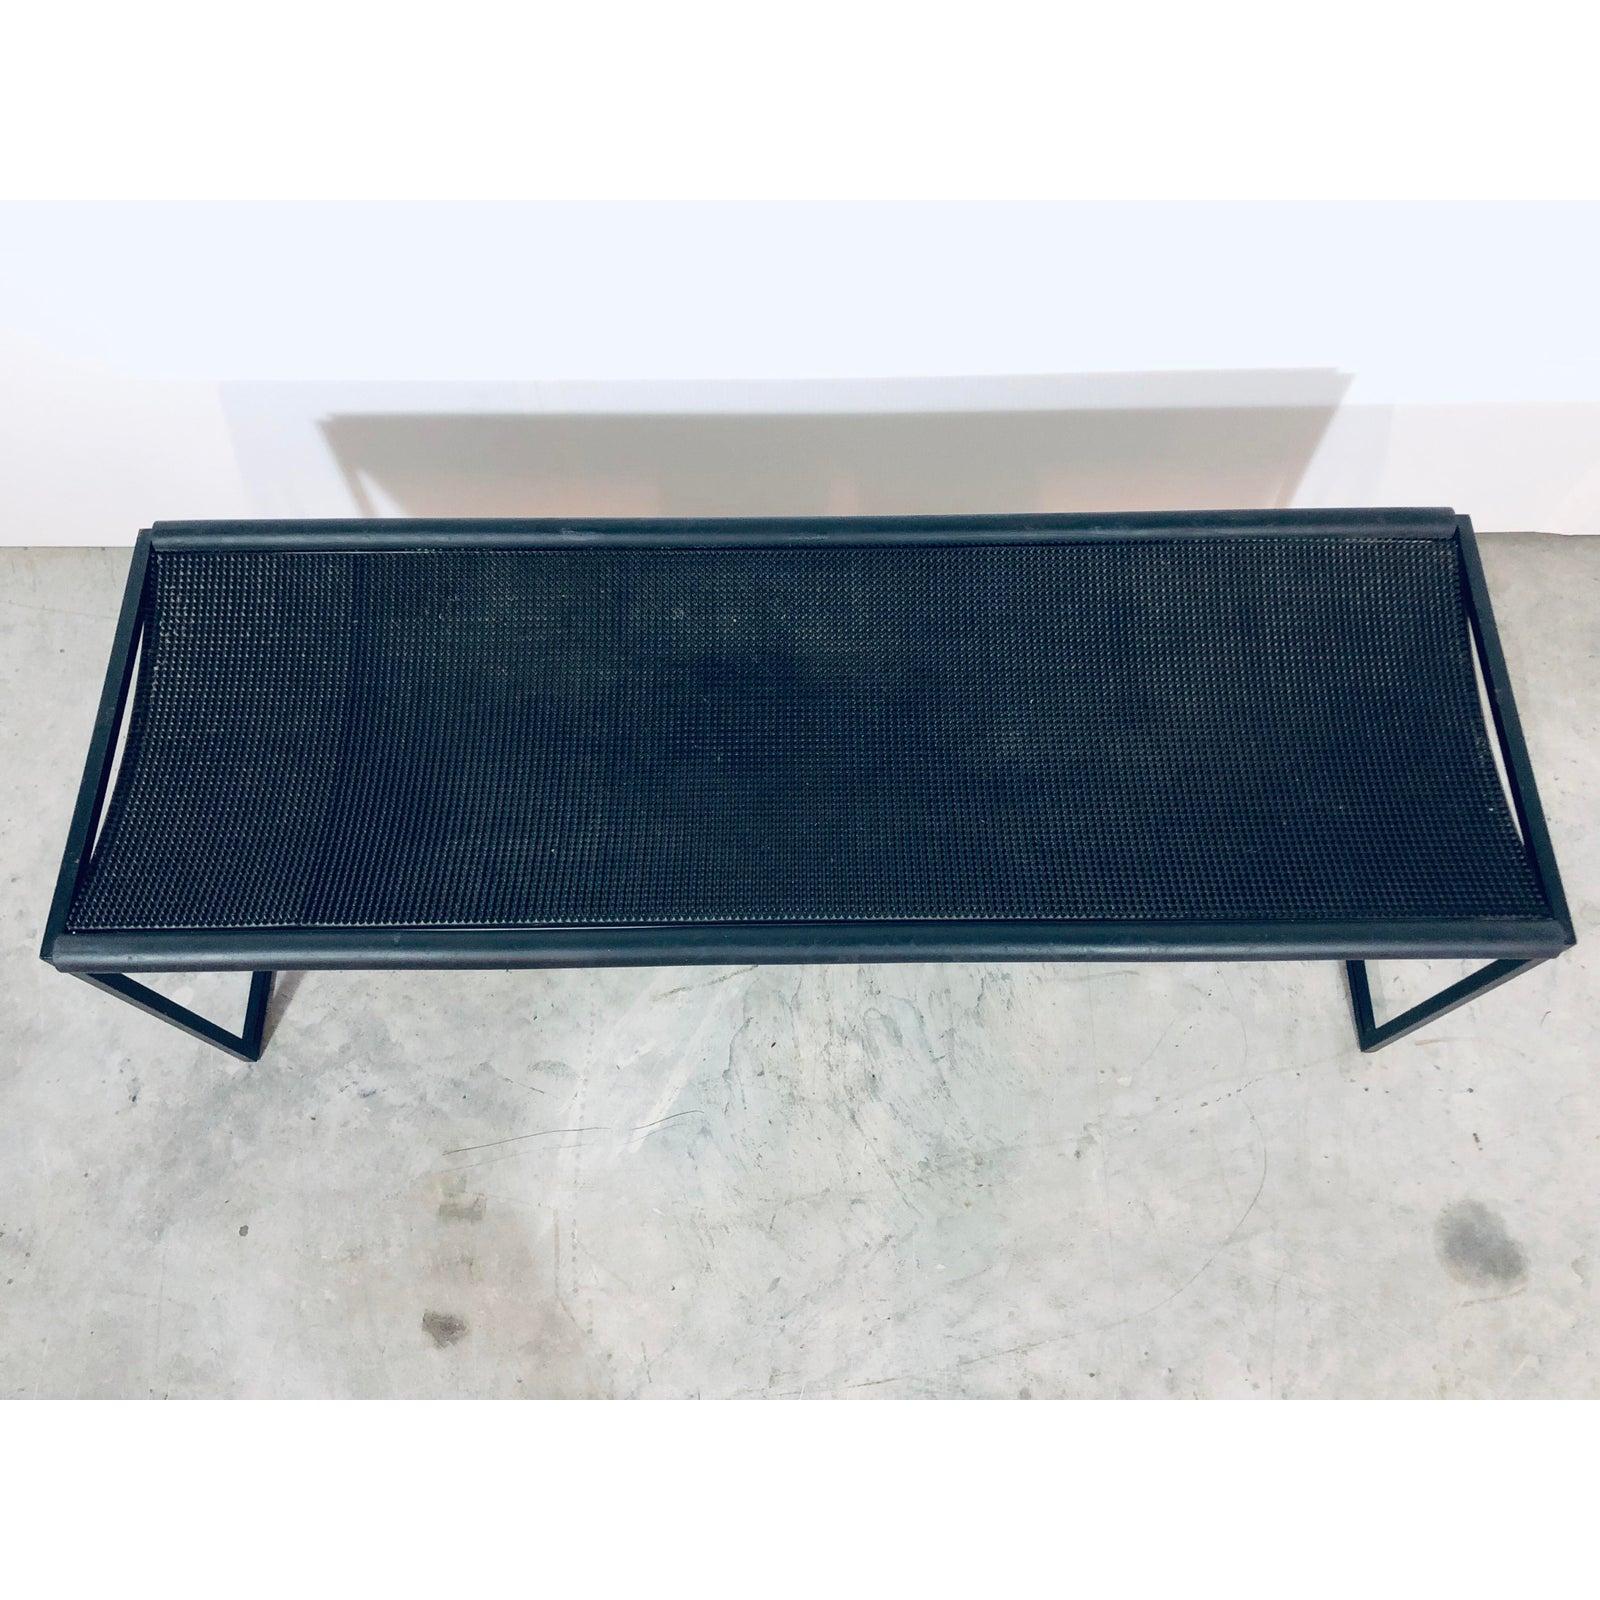 Maurizio Peregalli Modernist Bench for Zues, Italy, 1980s For Sale 4